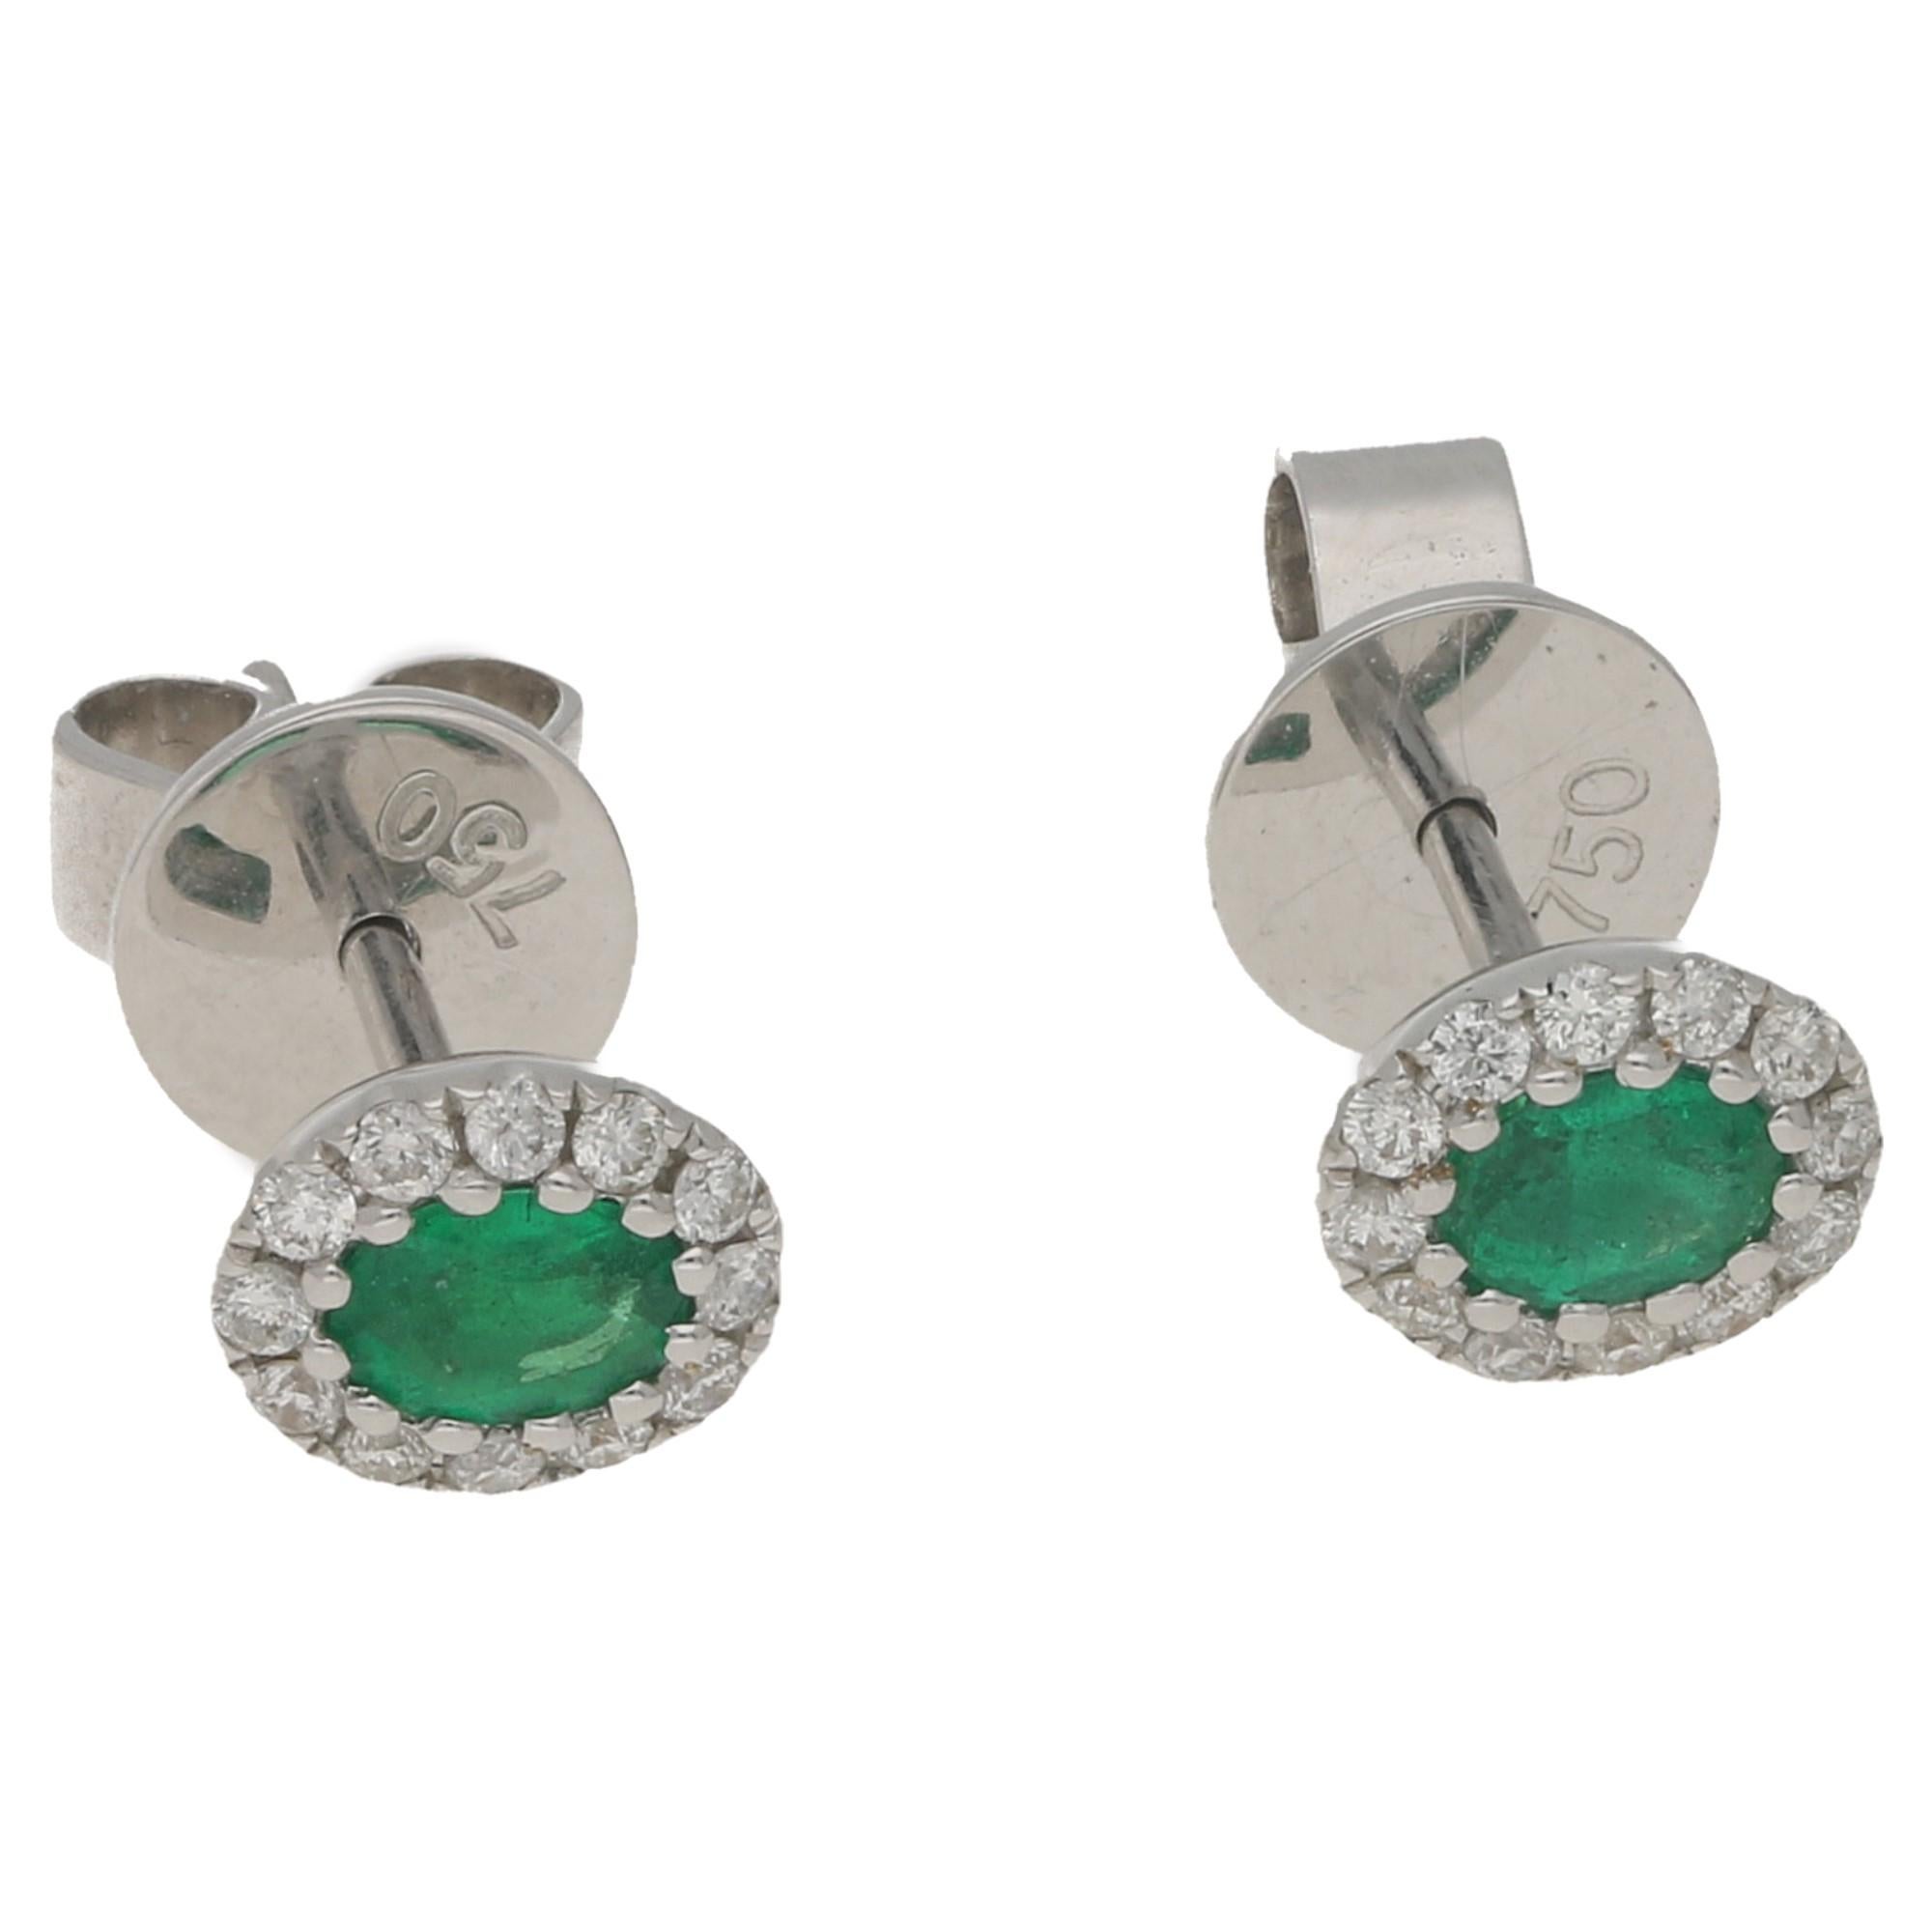 A pair of classic emerald and diamond oval cluster stud earrings. Set in 18ct white gold, the central emeralds totalling 0.27ct with excellent colour are surrounded by a cluster of round brilliant-cut diamonds totaling 0.15ct. Secured with a post